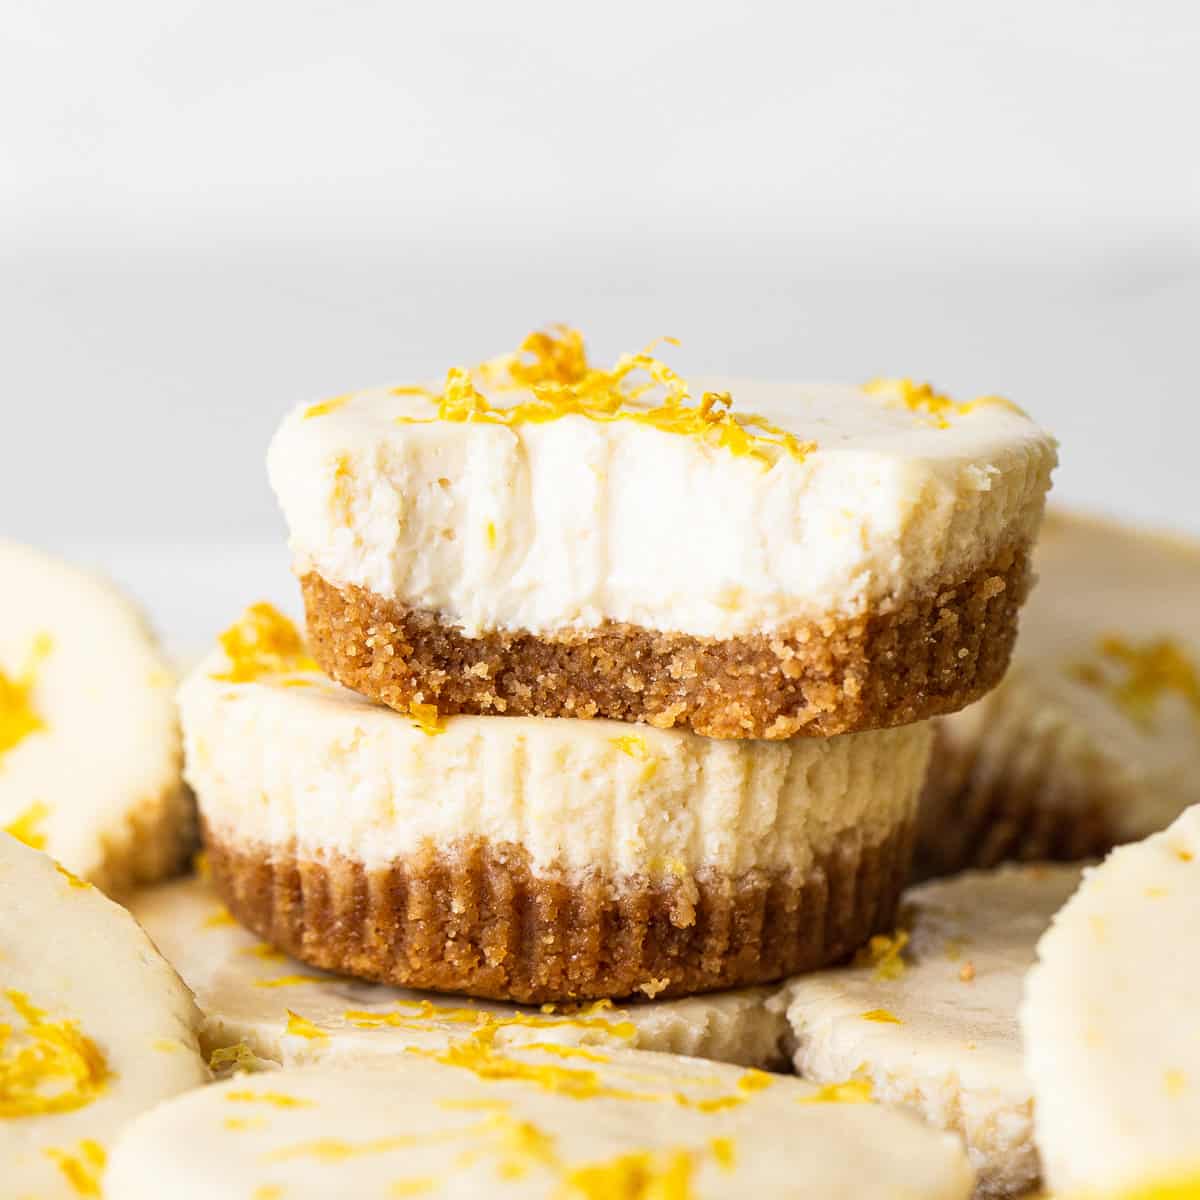 https://fitfoodiefinds.com/wp-content/uploads/2023/01/Lemon-Cheesecake-Cups-sq.jpg